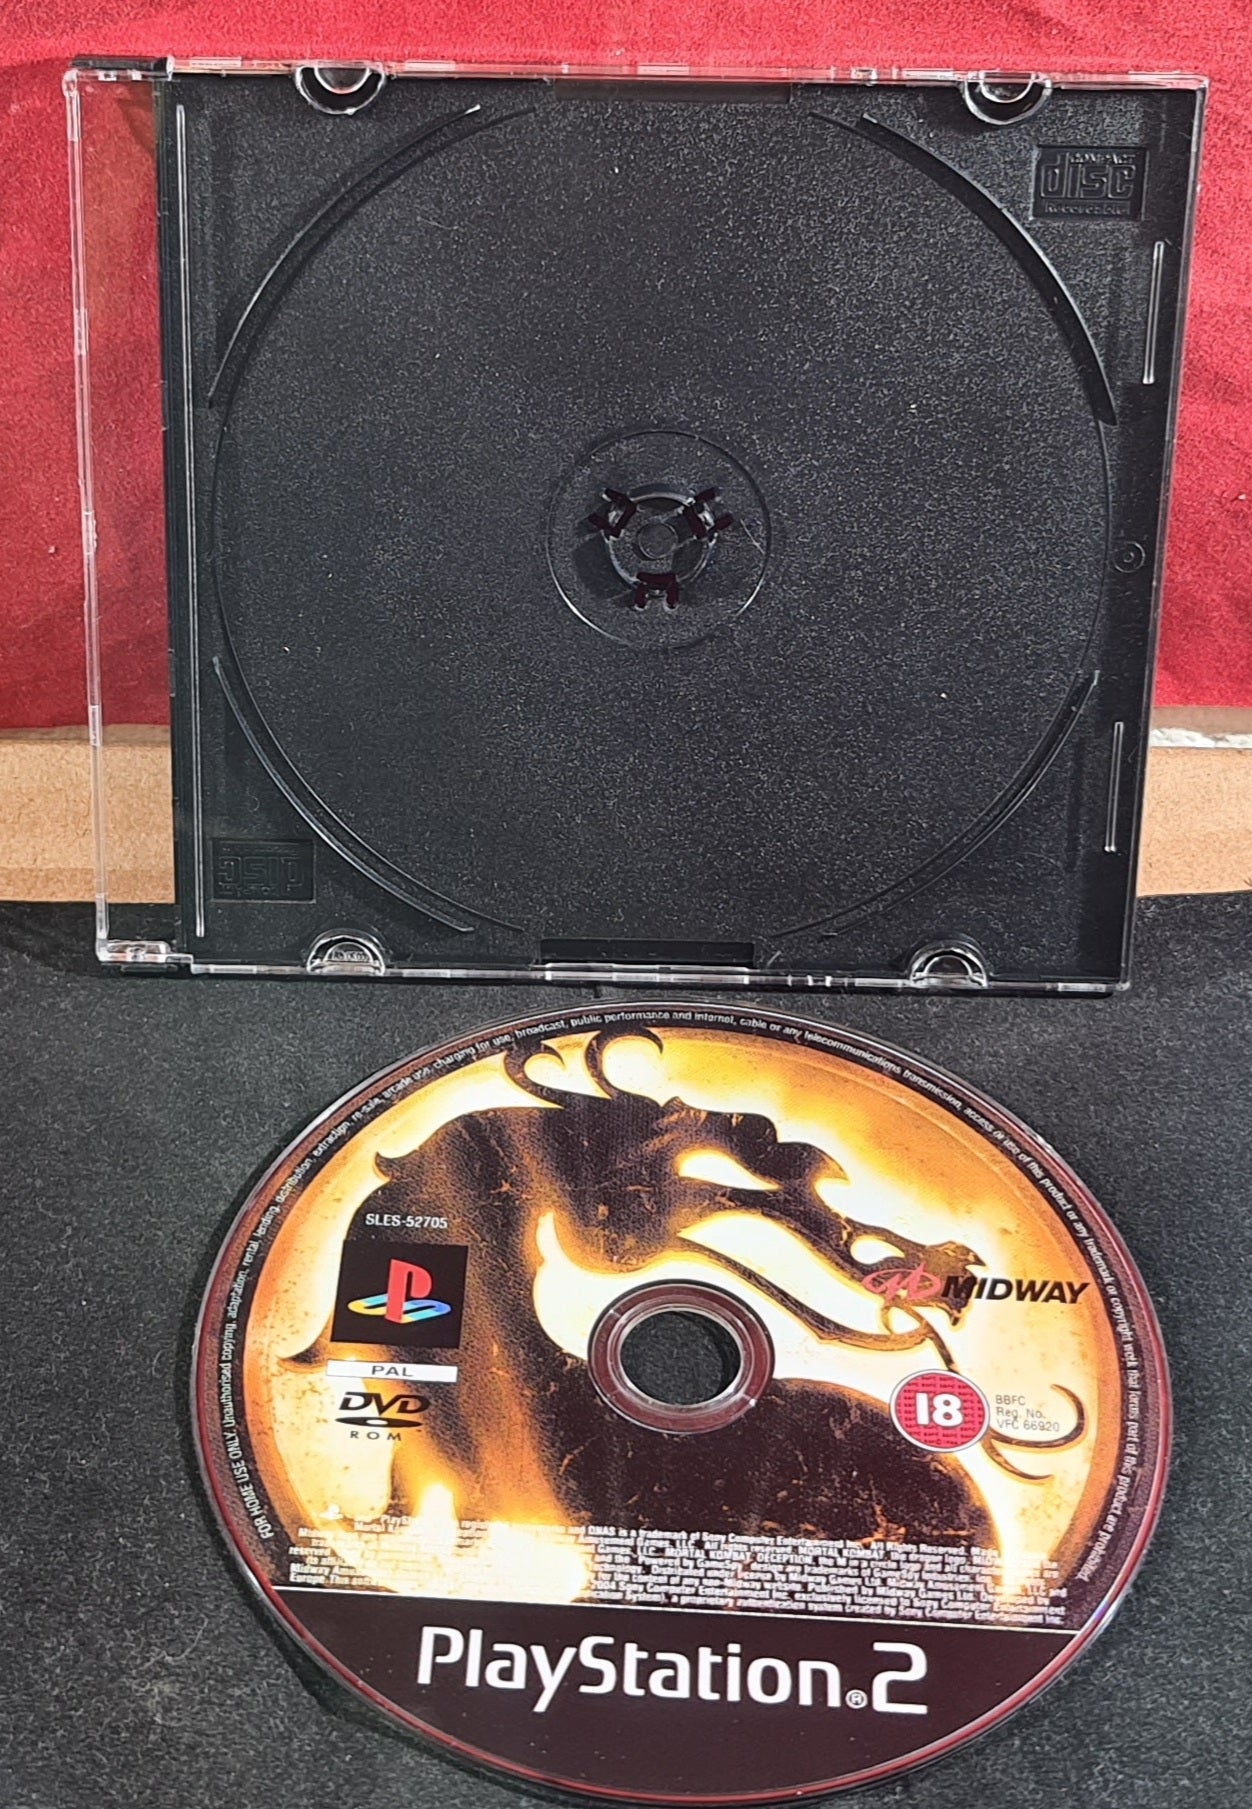 Mortal Kombat Deception Sony Playstation 2 (PS2) Game Disc Only